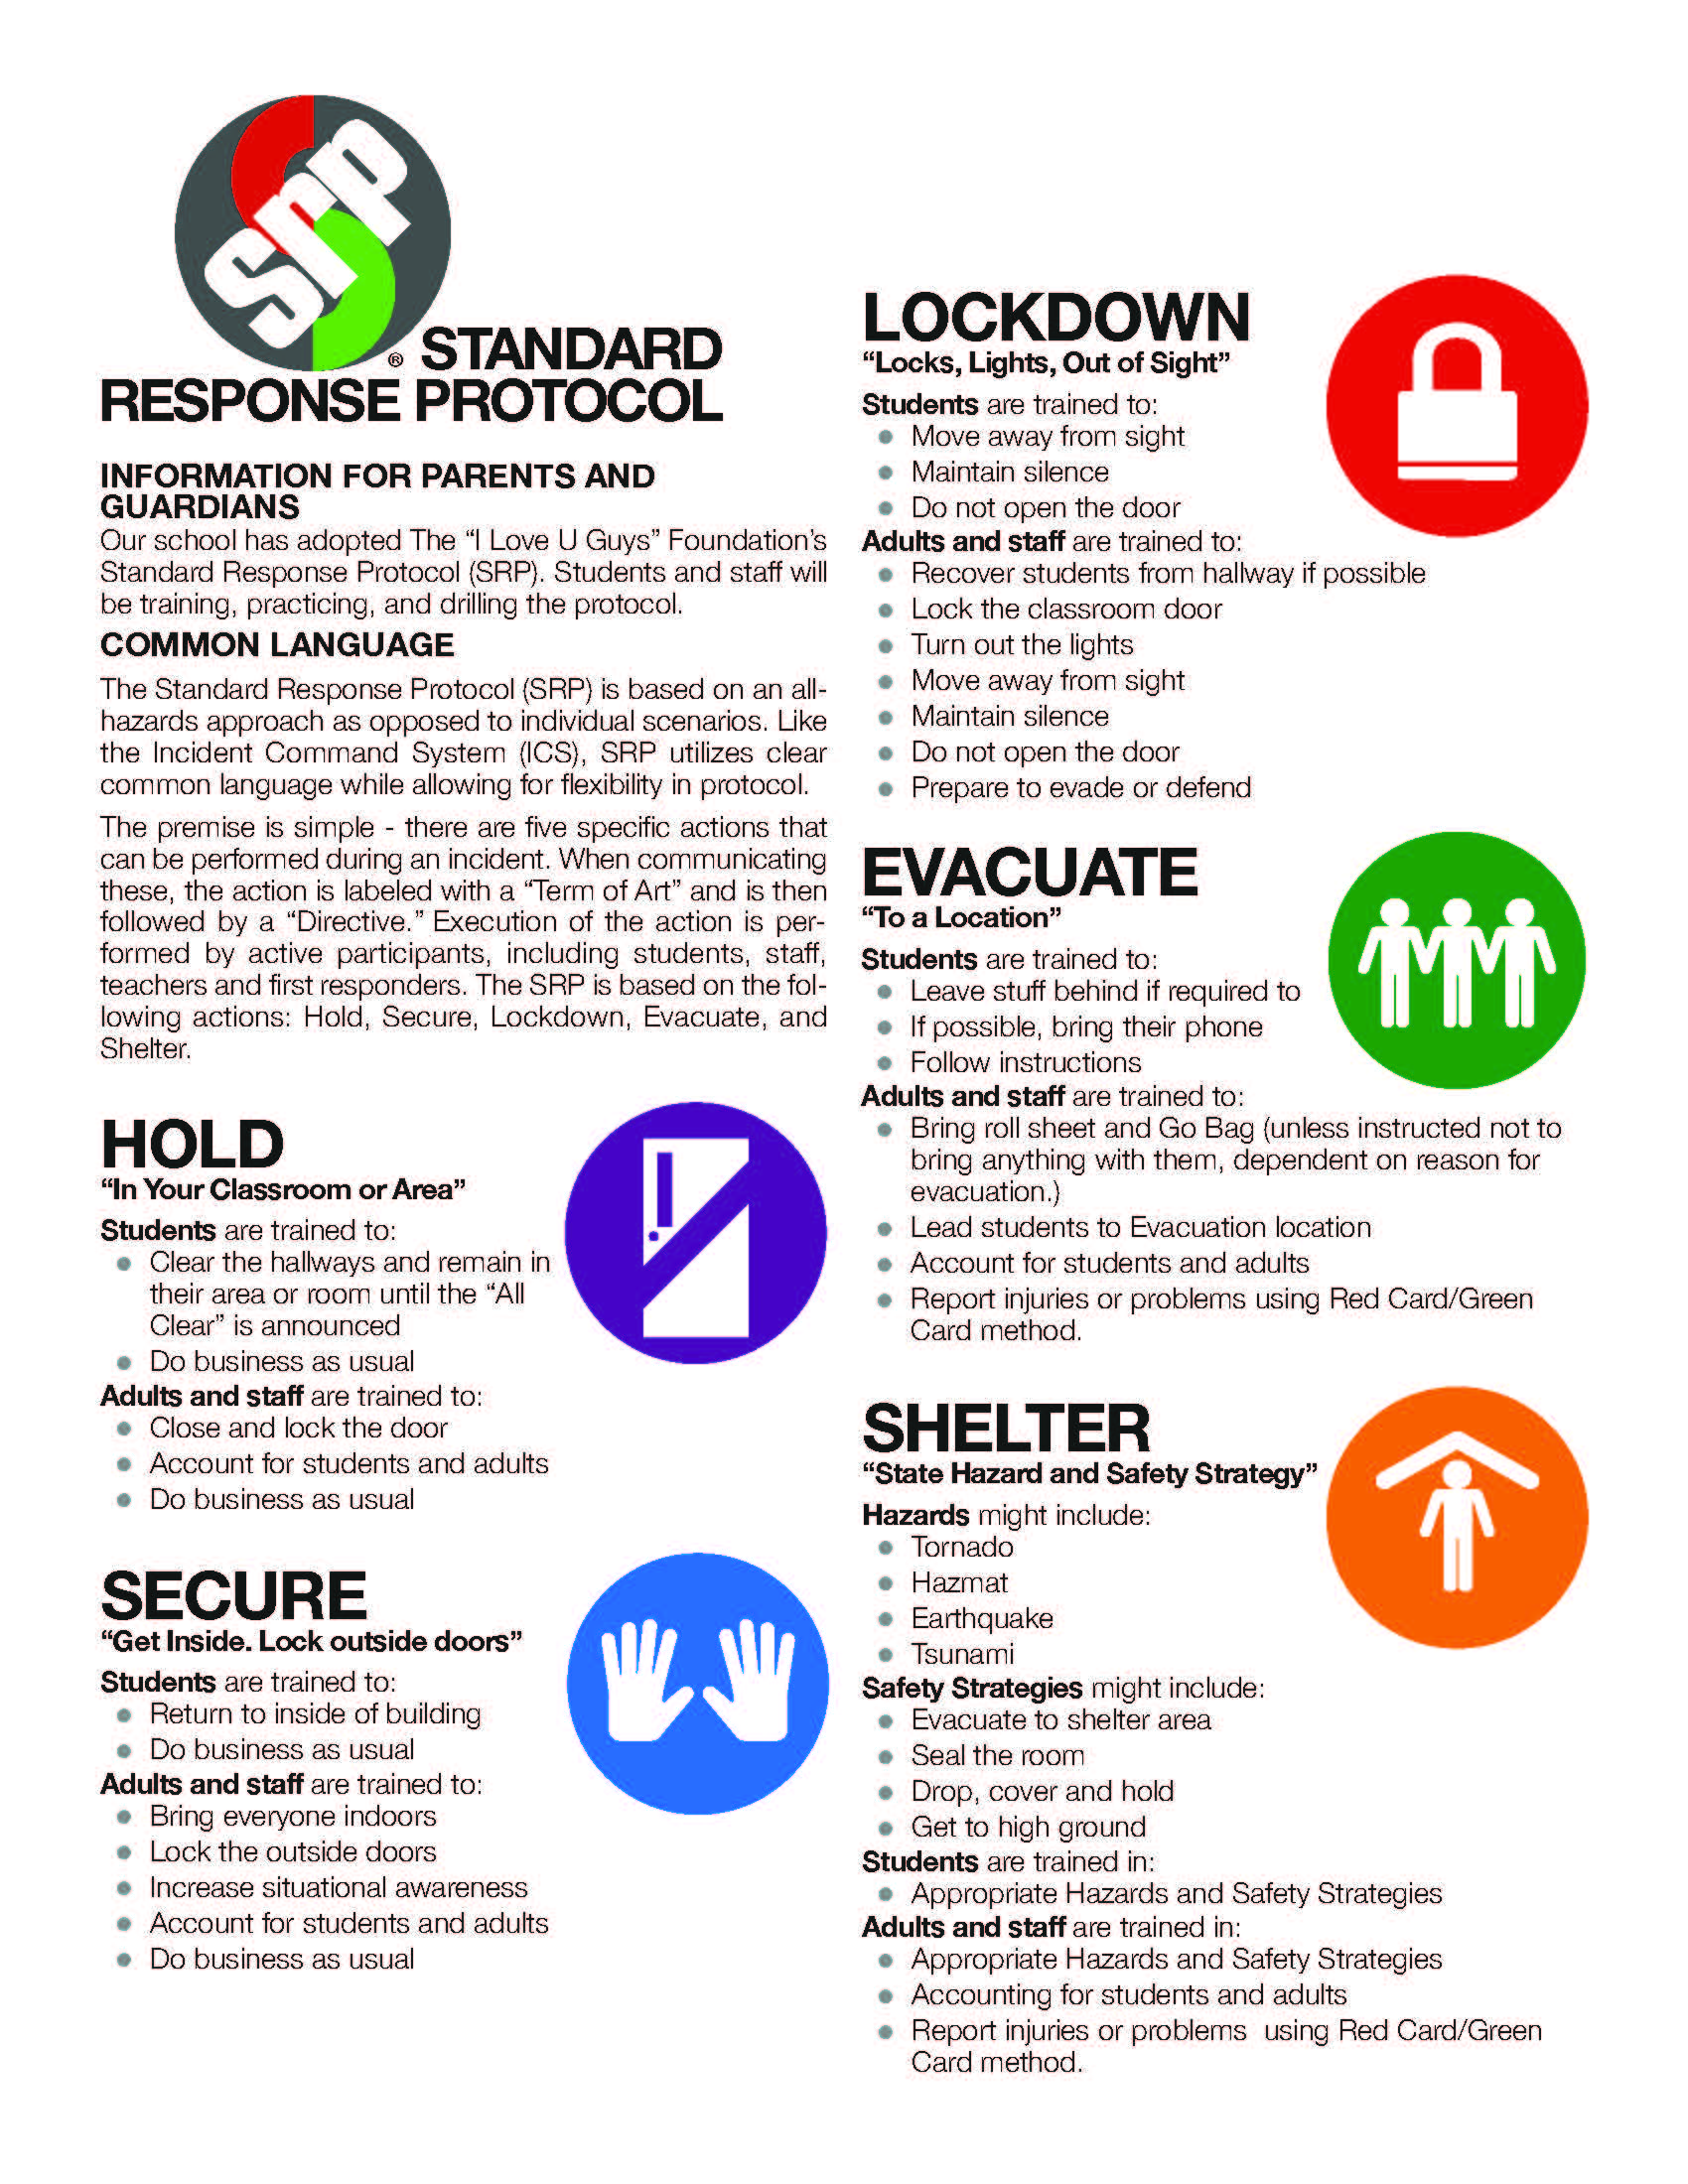 tit II STANDARD ® RESPONSE PROTOCOL Hold “In Your Classroom or Area” Students are trained to: • Clear the hallways and remain in their area or room until the “All Clear” is announced • Do business as usual Adults and staff are trained to: • Close and lock the door • Account for students and adults • Do business as usual SECURE “Get Inside. lock outside doors” Students are trained to: • Return to inside of building • Do business as usual Adults and staff are trained to: • Bring everyone indoors • Lock the outside doors • Increase situational awareness • Account for students and adults • Do business as usual INFoRMATIoN FoR PARENTS ANd GUARdIANS Our school has adopted The “I Love U Guys” Foundation’s Standard Response Protocol (SRP). Students and staff will be training, practicing, and drilling the protocol. CoMMoN lANGUAGE The Standard Response Protocol (SRP) is based on an allhazards approach as opposed to individual scenarios. Like the Incident Command System (ICS), SRP utilizes clear common language while allowing for flexibility in protocol. The premise is simple - there are five specific actions that can be performed during an incident. When communicating these, the action is labeled with a “Term of Art” and is then followed by a “Directive.” Execution of the action is performed by active participants, including students, staff, teachers and first responders. The SRP is based on the following actions: Hold, Secure, Lockdown, Evacuate, and Shelter. EVACUATE “To a location” Students are trained to: • Leave stuff behind if required to • If possible, bring their phone • Follow instructions Adults and staff are trained to: • Bring roll sheet and Go Bag (unless instructed not to bring anything with them, dependent on reason for evacuation.) • Lead students to Evacuation location • Account for students and adults • Report injuries or problems using Red Card/Green Card method. SHElTER “State Hazard and Safety Strategy” Hazards might include: • Tornado • Hazmat • Earthquake • Tsunami Safety Strategies might include: • Evacuate to shelter area • Seal the room • Drop, cover and hold • Get to high ground Students are trained in: • Appropriate Hazards and Safety Strategies Adults and staff are trained in: • Appropriate Hazards and Safety Strategies • Accounting for students and adults • Report injuries or problems using Red Card/Green Card method. loCKdoWN “locks, lights, out of Sight” Students are trained to: • Move away from sight • Maintain silence • Do not open the door Adults and staff are trained to: • Recover students from hallway if possible • Lock the classroom door • Turn out the lights • Move away from sight • Maintain silence • Do not open the door • Prepare to evade or defend II II K12 2021 . STANDARD RESPONSE PROTOCOL STANDARD ® RESPONSE PROTOCOL PARENT GUIdANCE In the event of a live incident, parents may have questions about their role. SECURE “Get Inside. lock outside doors” Secure is called when there is something dangerous outside of the building. Students and staff are brought into the building and the outside doors will be locked. The school might display the Building is Secured poster on entry doors or nearby windows. Inside, it will be business as usual. SHoUld PARENTS CoME To THE SCHool dURING A SECURE EVENT? Probably not. Every effort is made to conduct classes as normal during a secure event. Additionally, parents may be asked to stay outside during a Secure event. WHAT IF PARENTS NEEd To PICK UP THEIR STUdENT? Depending on the situation, it may not be safe to release the student. As the situation evolves, Secure might change to a Monitored Entry and/or Controlled Release. WIll PARENTS bE NoTIFIEd WHEN A SCHool GoES INTo SECURE? When a secure event is brief or the hazard is non-violent, like a wild animal on the playground, there may not be a need to notify parents while the Secure is in place. With longer or more dangerous events, the school should notify parents that the school has increased their security. loCKdoWN “locks, lights, out of Sight” A Lockdown is called when there is something dangerous inside of the building. Students and staff are trained to enter or remain in a room that can be locked, and maintain silence. A Lockdown is only initiated when there is an active threat inside or very close to the building. SCHOOL IS SECURED MONITORED ENTRY AND CONTROLLED RELEASE ESCUELA BAJO PROTECCIÓN ENTRADA VIGILADA Y SALIDA CONTROLADA © Copyright 2009-2020, All Rights Reserved. The “I Love U Guys” Foundation. Conifer, CO. The Standard Response Protocol and Logo are Trademarks of The “I Love U Guys” Foundation and may be registered in certain j04/16ictions. This material may be duplicated for distribution per “SRP Terms of Use”. SRP-K12 Secure Monitored Door Poster_EN-SP | V 3.0 | Revised: 04/31/2020 SHoUld PARENTS CoME To THE SCHool dURING A loCKdoWN? The natural inclination for parents is to go to the school during a Lockdown. Understandable, but perhaps problematic. If there is a threat inside the building, law enforcement will be responding. It is unlikely that parents will be granted access to the building or even the campus. If parents are already in the school, they will be instructed to Lockdown as well. SHoUld PARENTS TExT THEIR STUdENTS? The school recognizes the importance of communication between parents and students during a Lockdown event. Parents should be aware though, during the initial period of a Lockdown, it may not be safe for students to text their parents. As the situation resolves, students may be asked to update their parents on a regular basis. In some cases, students may be evacuated and transported off-site for a student-parent reunification. WHAT AboUT UNANNoUNCEd dRIllS? The school may conduct unscheduled drills, however it is highly discouraged to conduct one without announcing that it as a drill. That’s called an unannounced drill and can cause undue concern and stress. Parents should recognize that the school will always inform students that it is a drill during the initial announcement. It’s important to differentiate between a drill and an exercise. A drill is used to create the “Muscle Memory” associated with a practiced action. There is no simulation of an event; this is simply performing the action. An exercise simulates an actual event to test the capacity of personnel and equipment. CAN PARENTS obSERVE oR PARTICIPATE IN THE dRIllS? The school welcomes parents who wish to observe or participate in drills. DRILL IN PROGRESS NO ONE IN OR OUT SIMULACRO EN CURSO NO SE PERMITE LA ENTRADA O SALIDA DE NADIE © Copyright 2009-2020, All Rights Reserved. The “I Love U Guys” Foundation. Conifer, CO. The Standard Response Protocol and Log o are Trademarks of The “I Love U Guys” Foundation and may be registered in certain jurisdictions. This material may be duplicated for distribution per “SRP Terms of Use”. Drill in Progress_EN-SP | V 3.0 | Revised: 04/16/2020 © Copyright 2009-2020, All Rights Reserved. The “I Love U Guys” Foundation. Conifer, CO. The Standard Response Protocol and Logo are Trademarks of The “I Love U Guys” Foundation and may be registered in certain jurisdictions. This material may be duplicated for distribution per “SRP Terms of Use”. SRP-K12 2021 Parent Handout | V 3.0 | Revised: 04/21/2020 | http://iloveuguys.org 